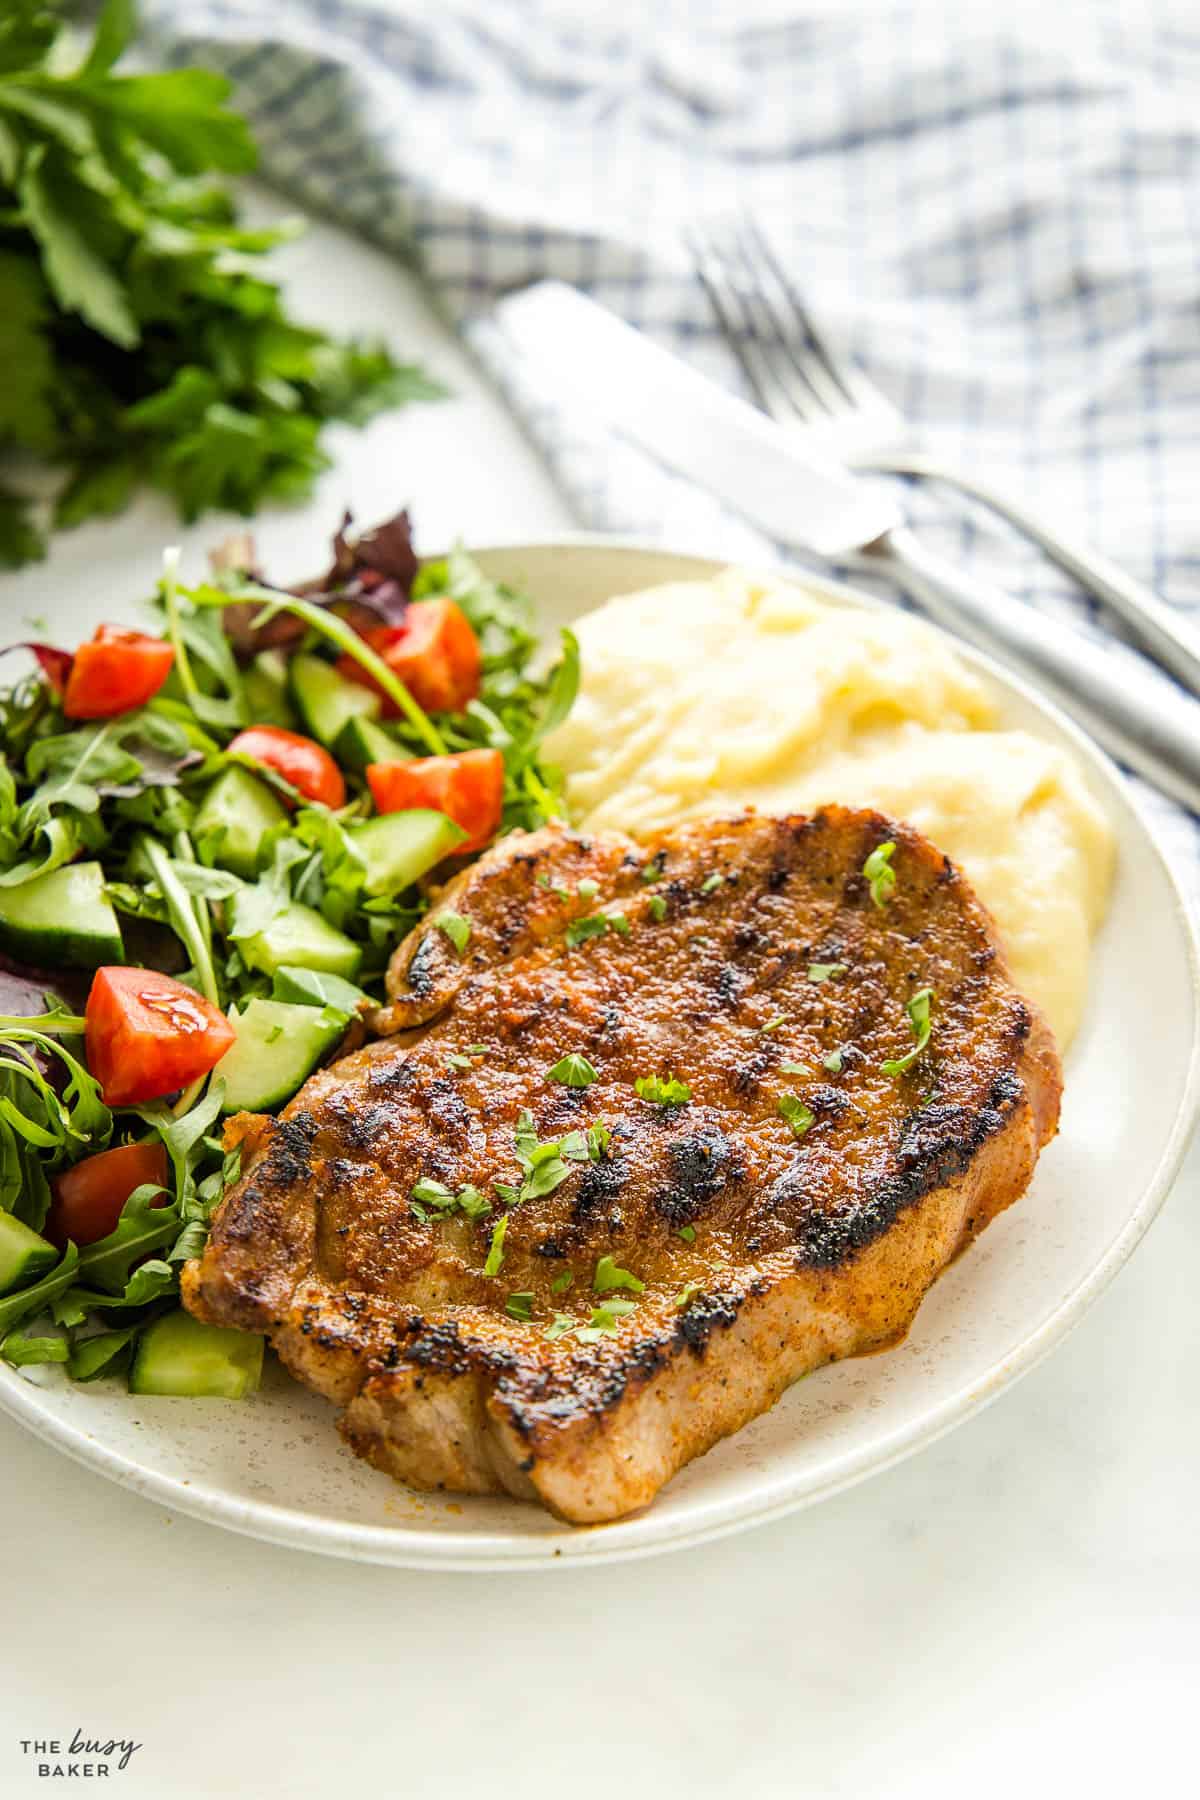 Boston butt steak on plate with mashed potatoes and salad